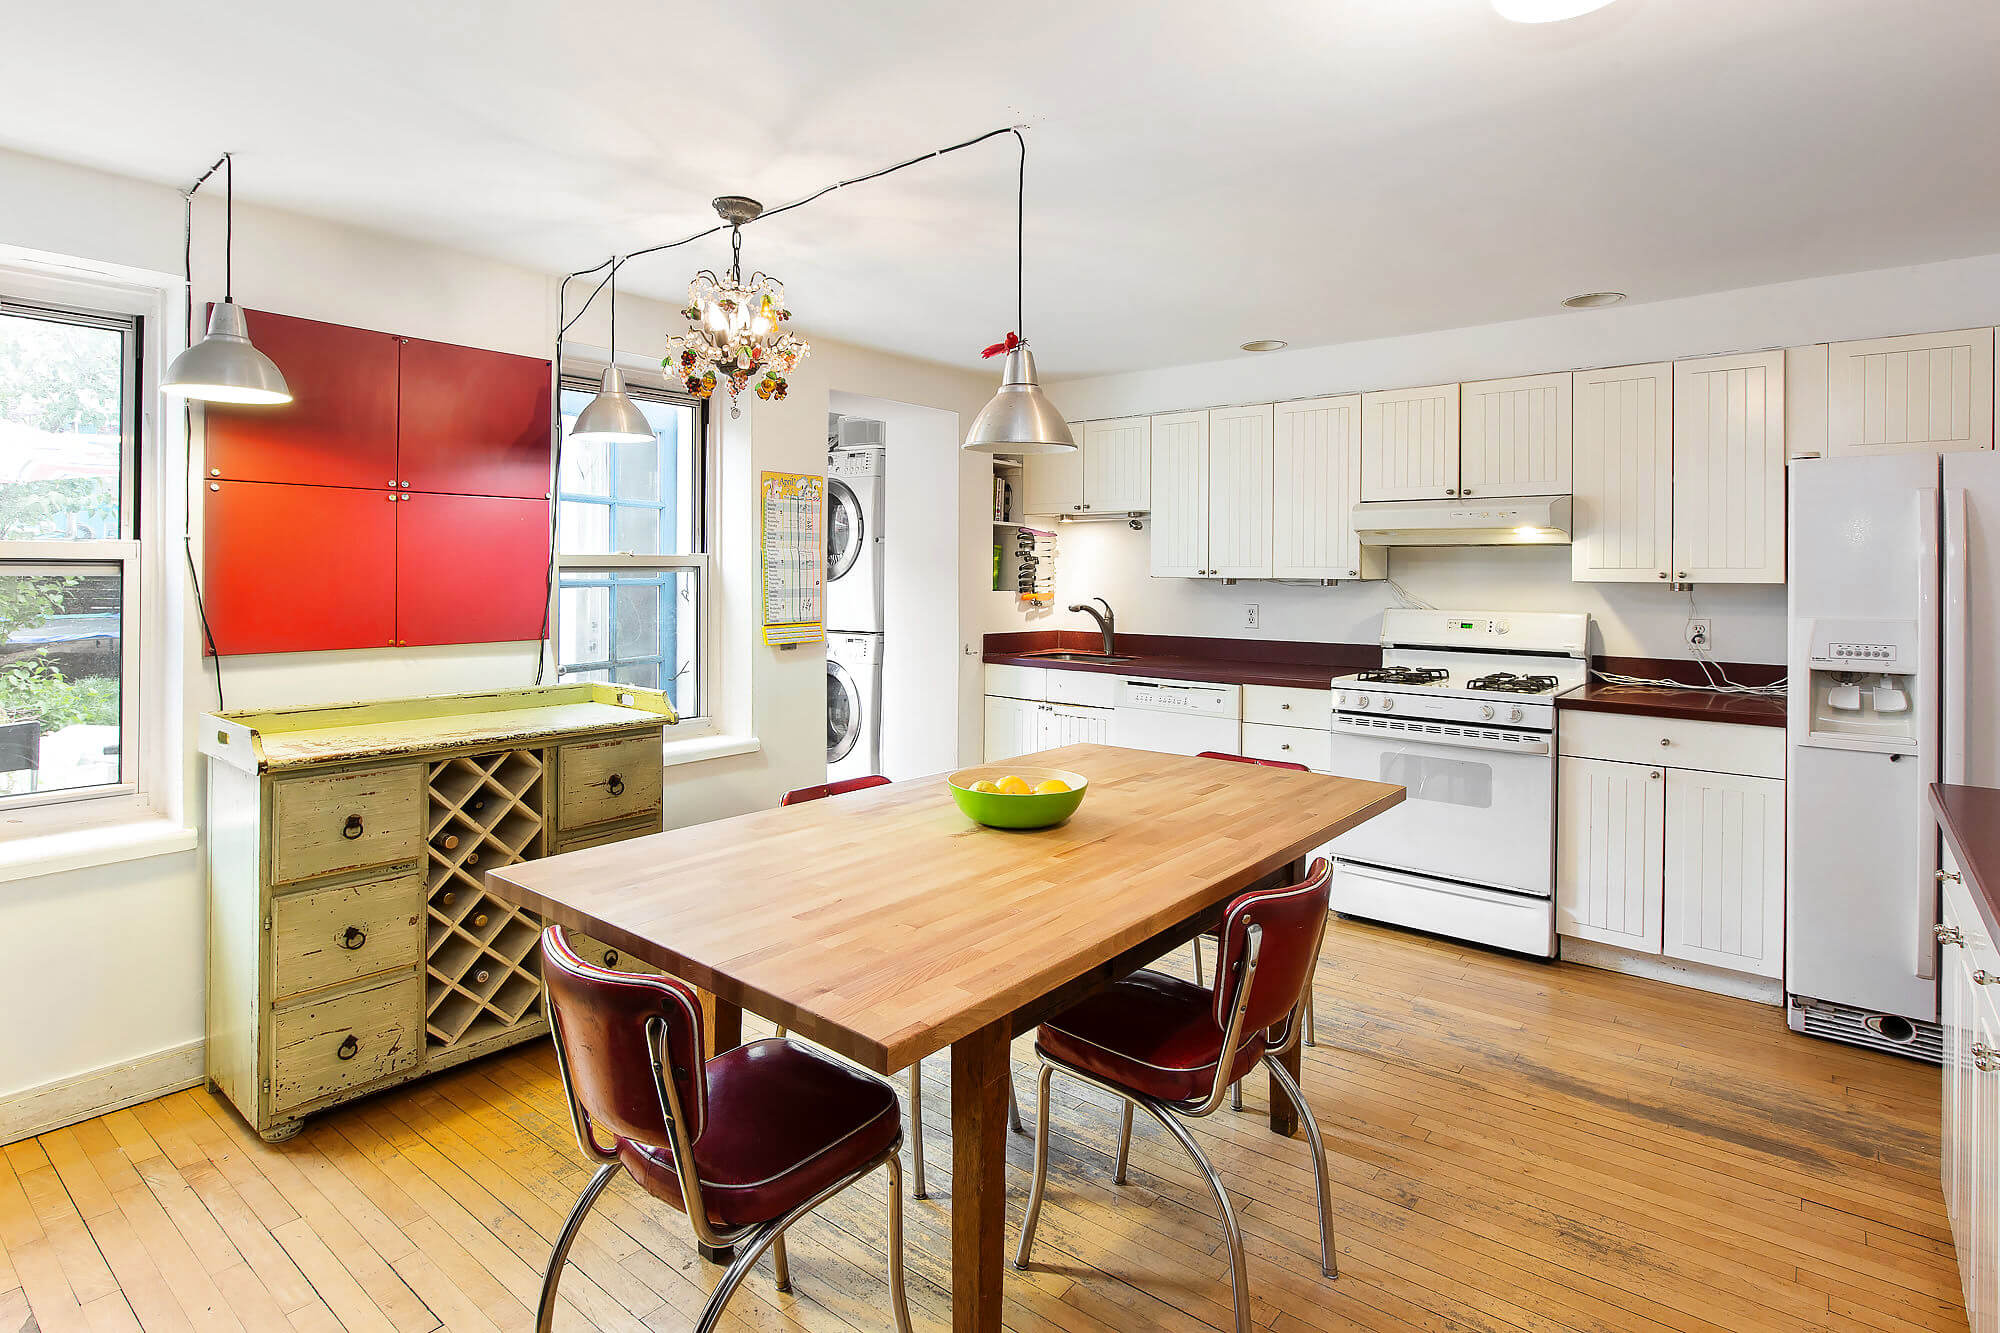 Brooklyn Homes for Sale in Carroll Gardens at 364 President Street